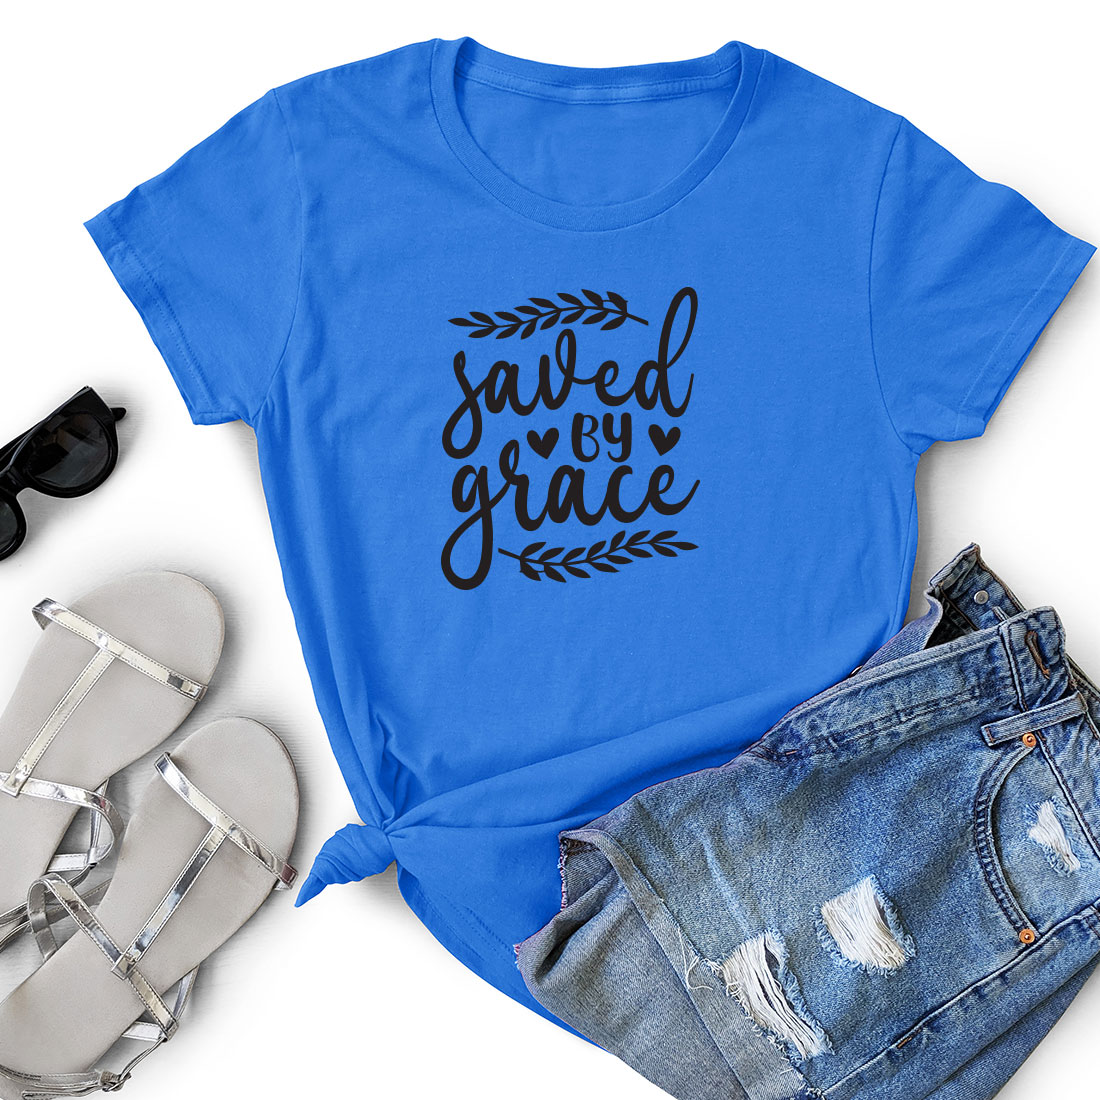 Blue t - shirt with the words saved by grace next to a pair of.